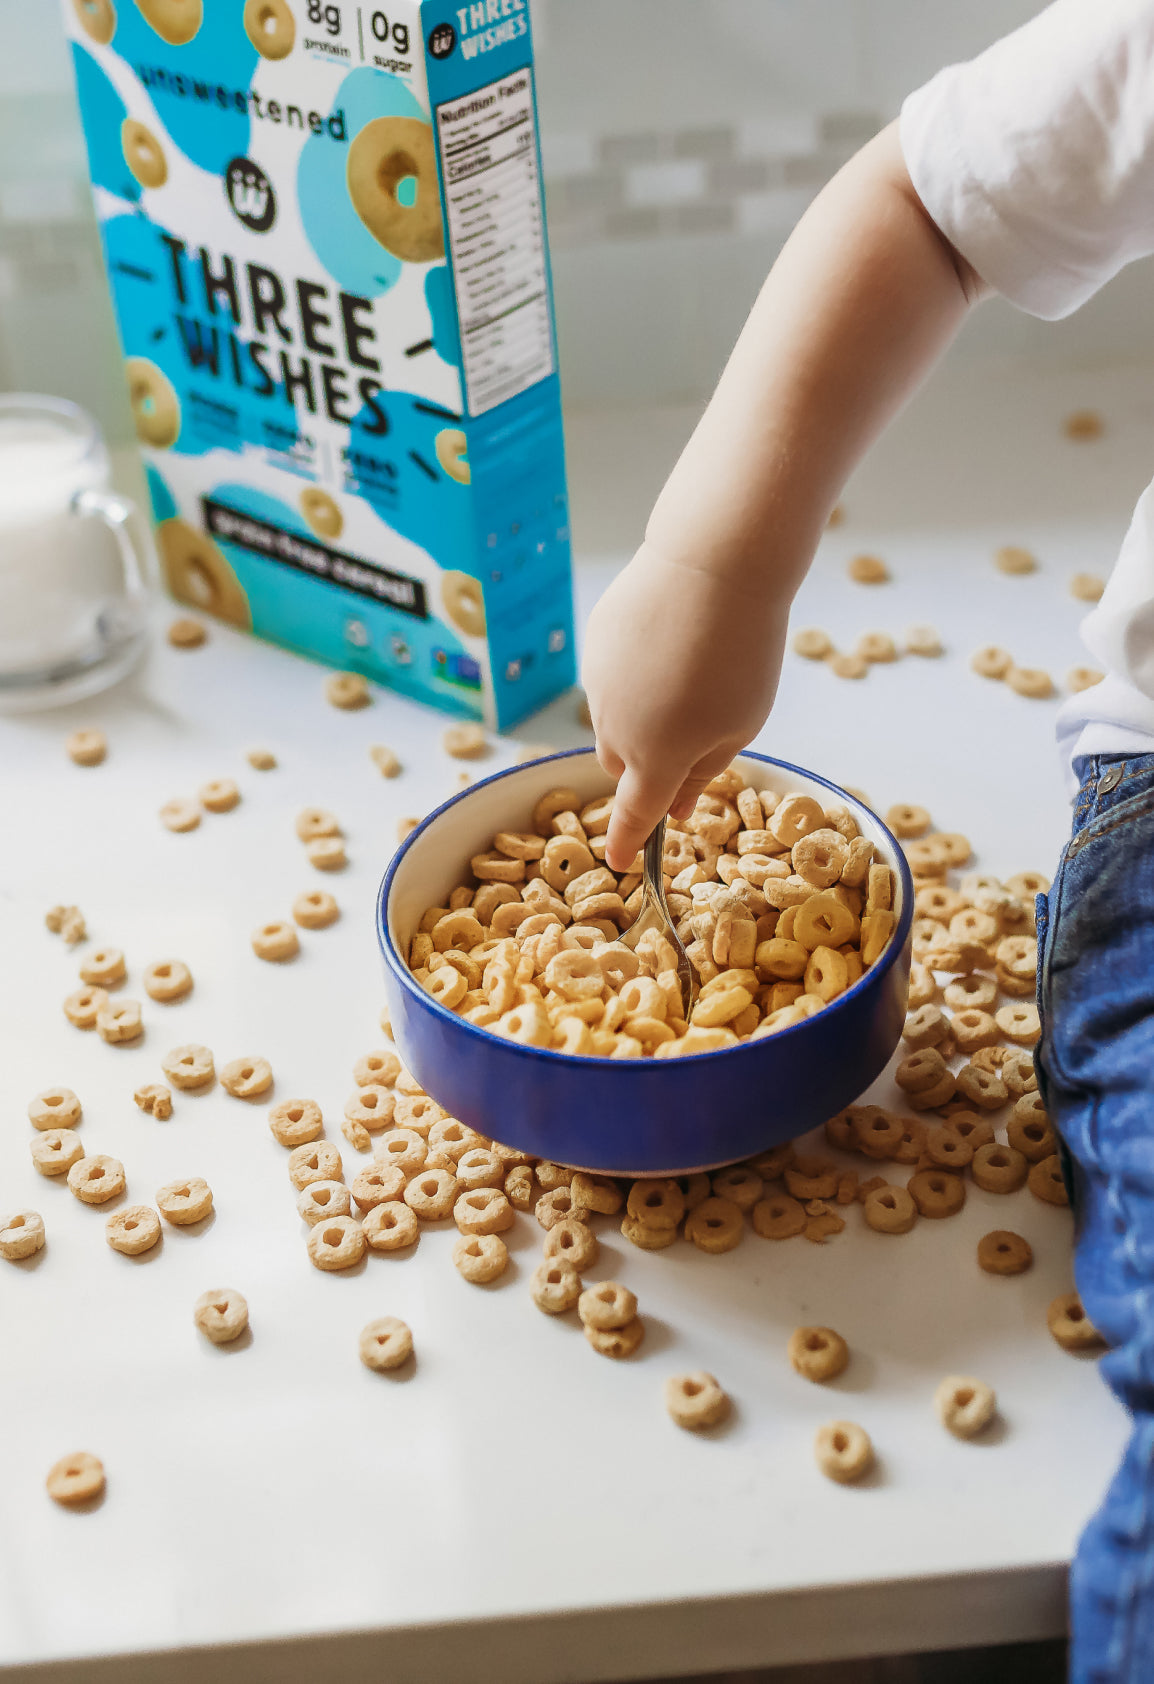 Three Wishes brings summertime classic flavor to better-for-you cereal  portfolio